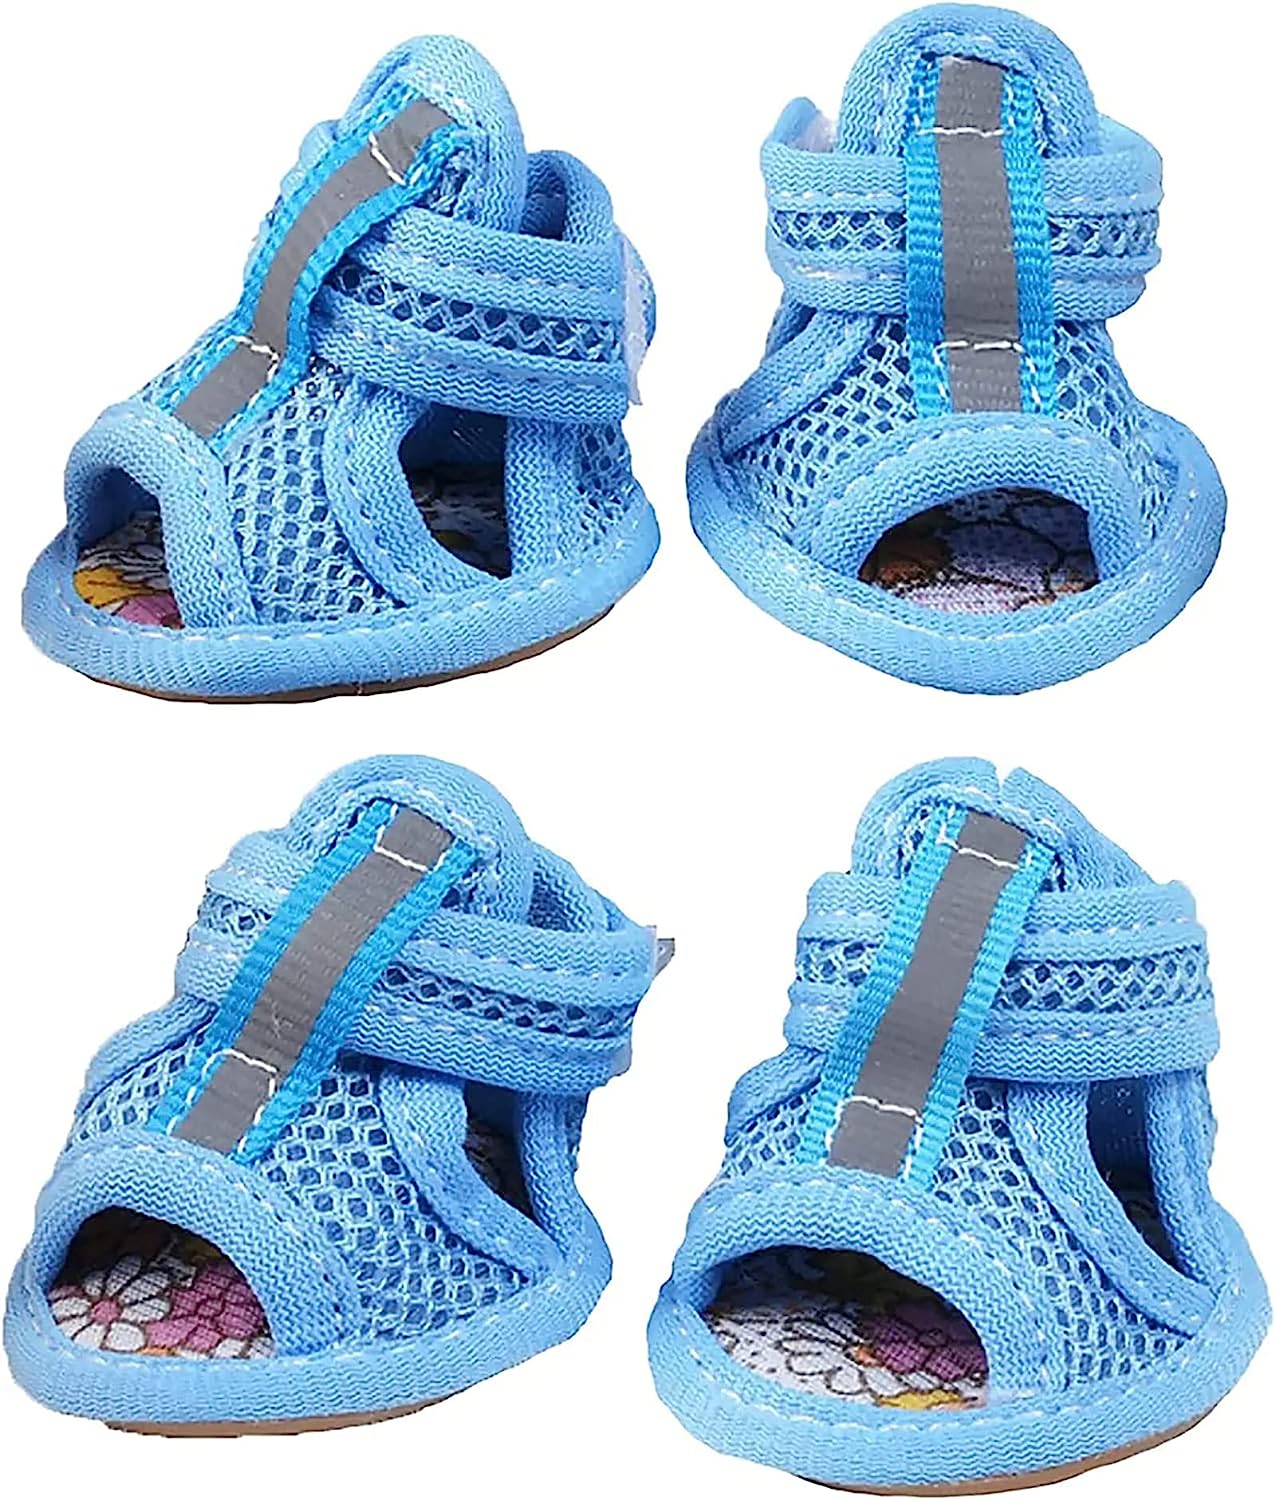 GabeFish Small Dog Summer Mesh Sandal Shoes Puppy Cats [...]